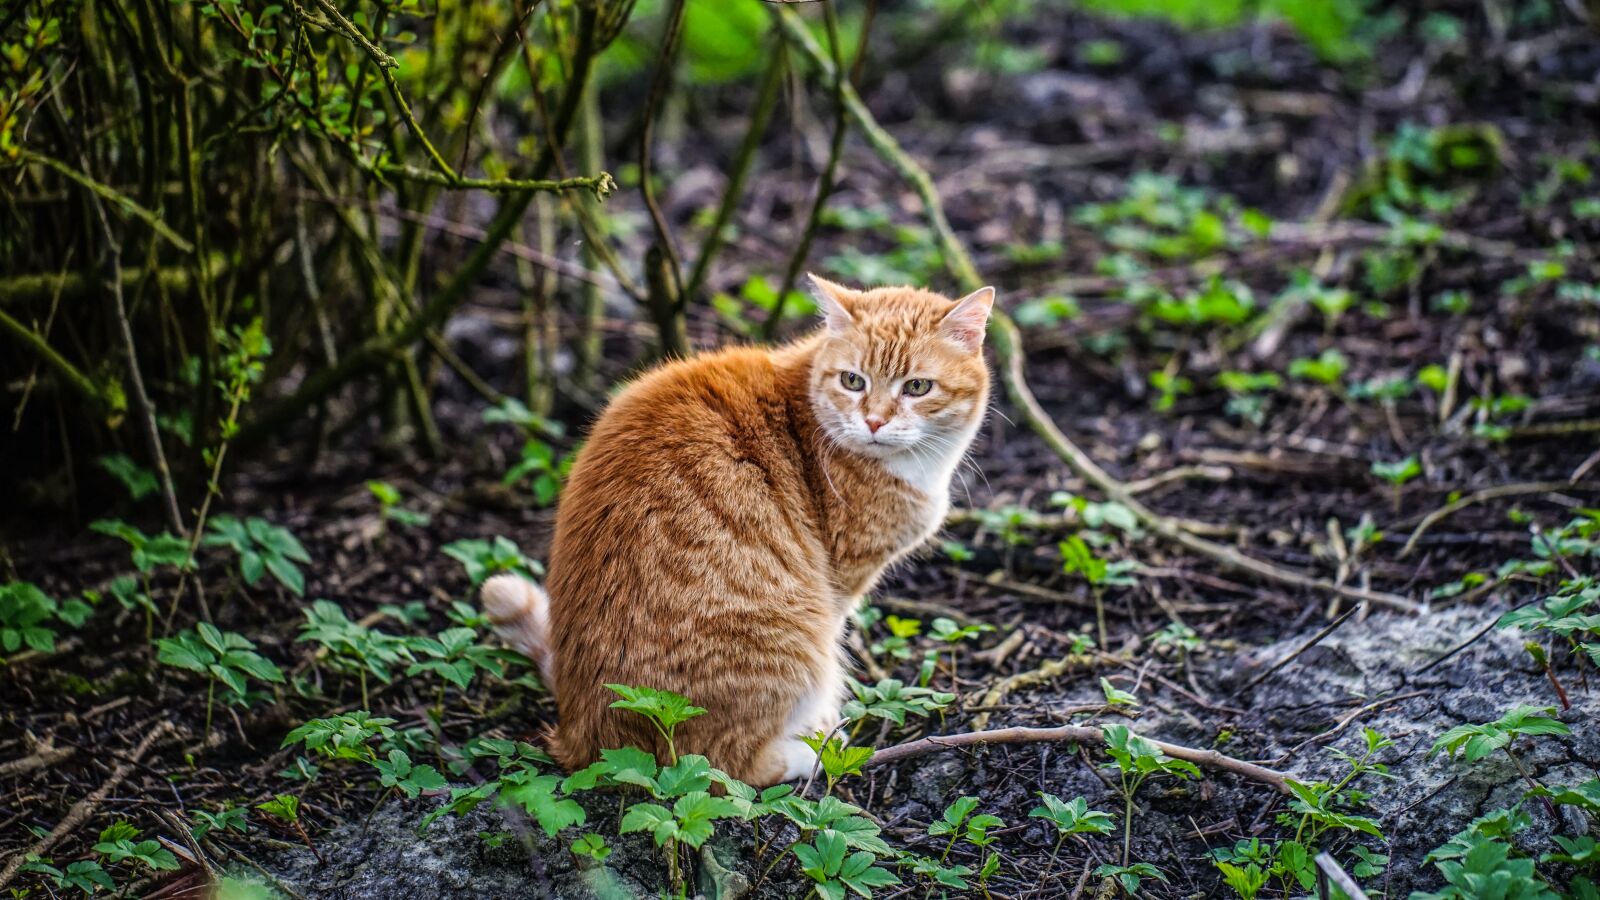 Sony a7 sample photo. Cat, nature, animal photography